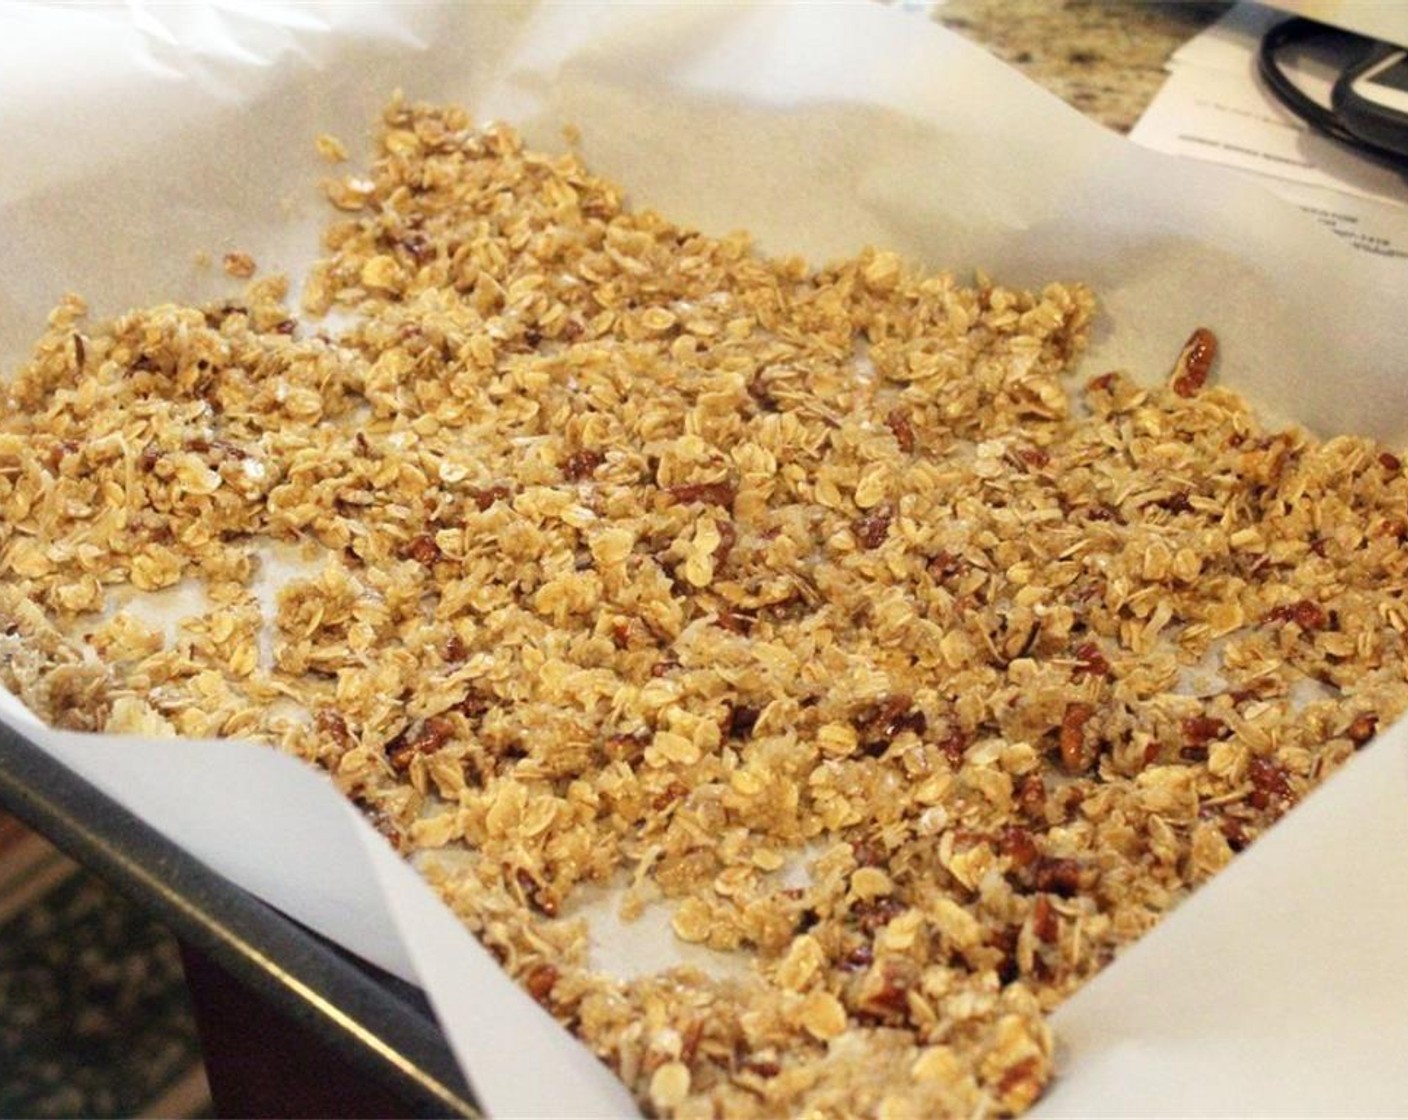 step 8 Spread granola mixture on the sheet pan in one even layer.